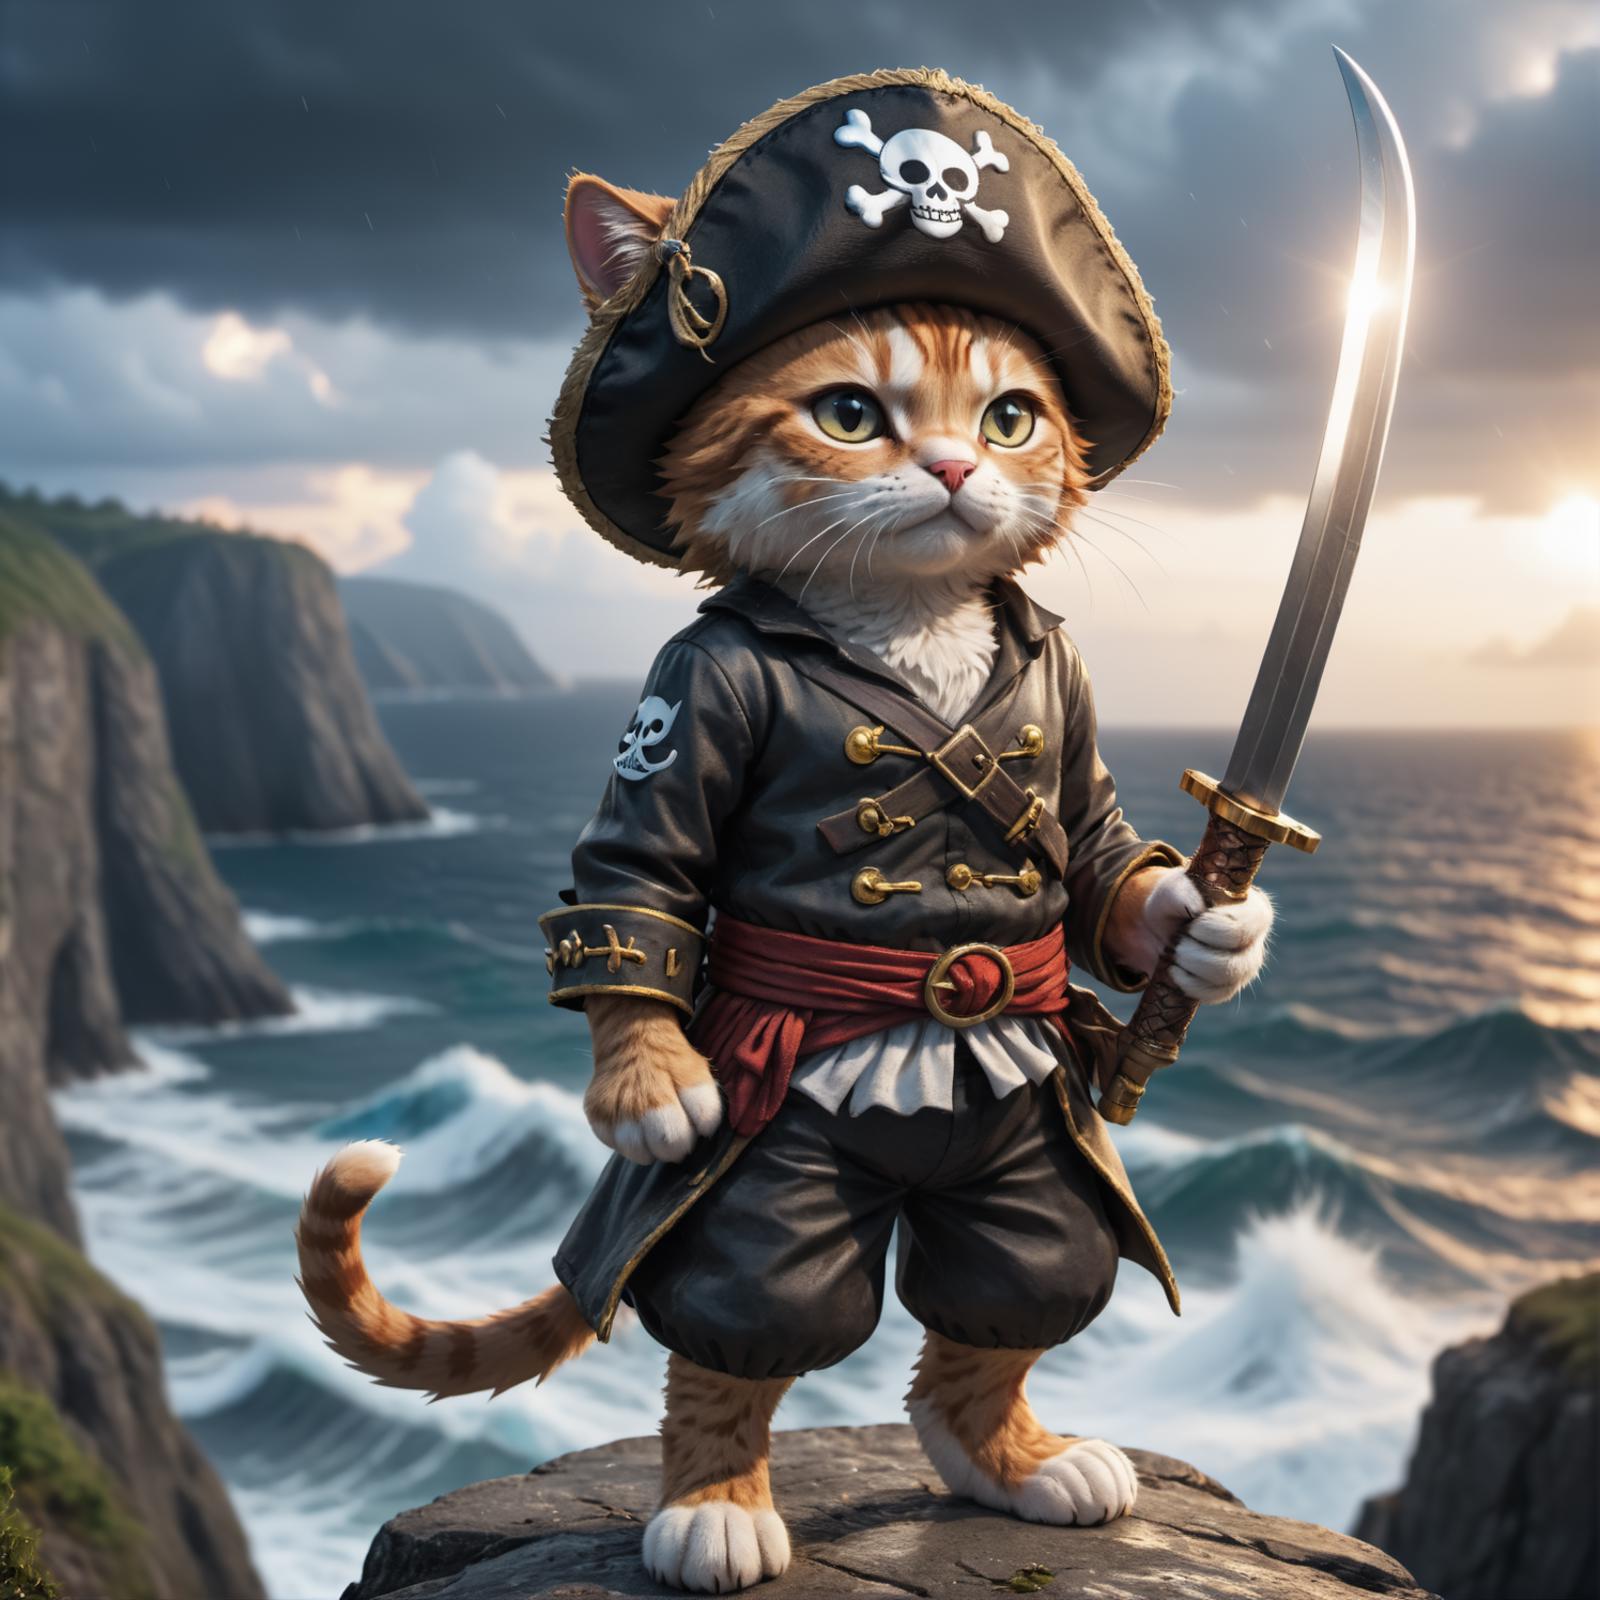 Artistic Illustration of a Cat in a Pirate's Outfit Holding a Sword.